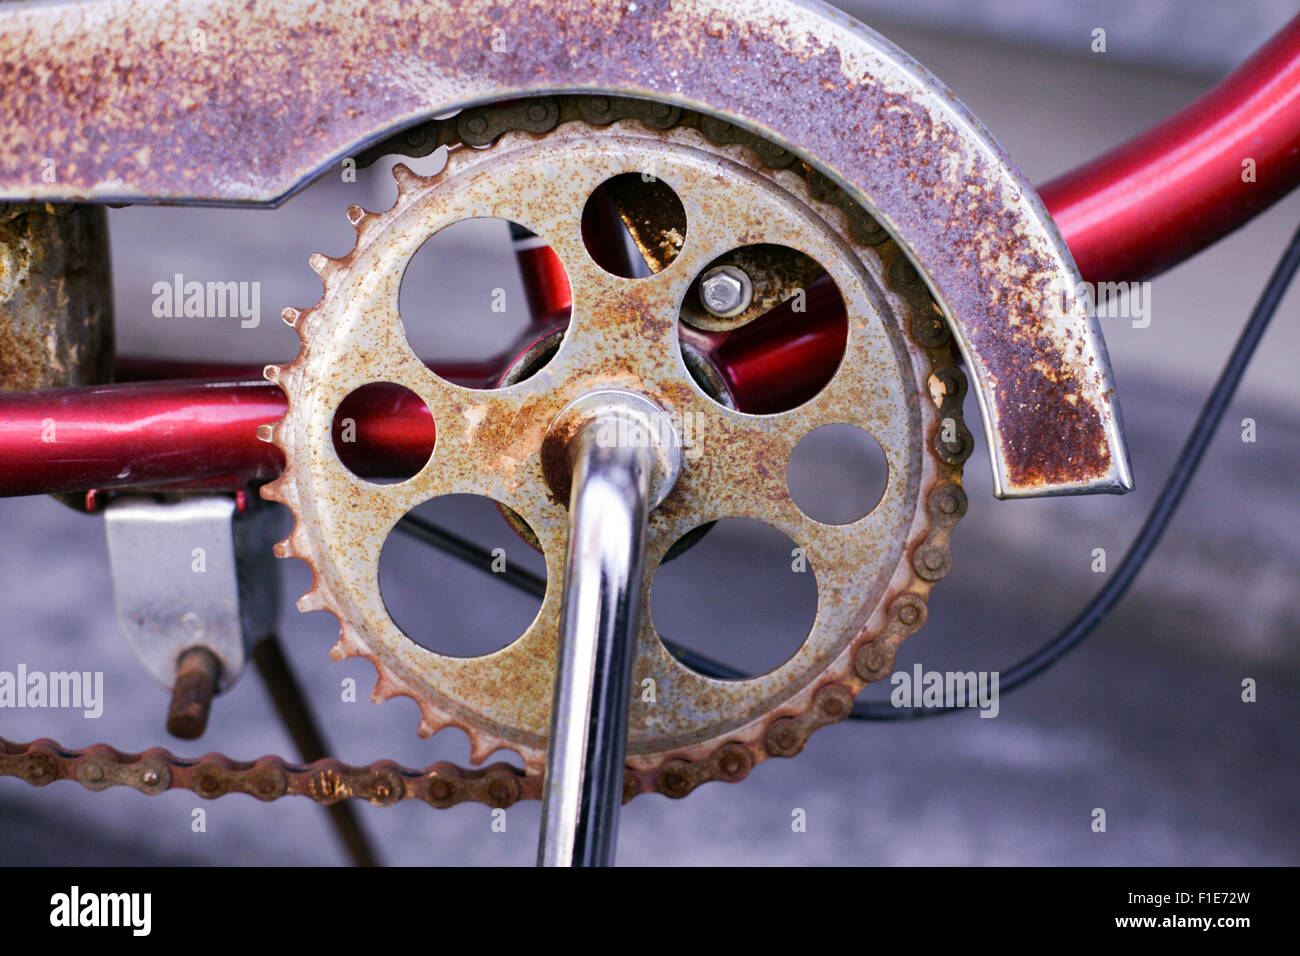 Rusty bicycle crank shaft and chain Stock Photo